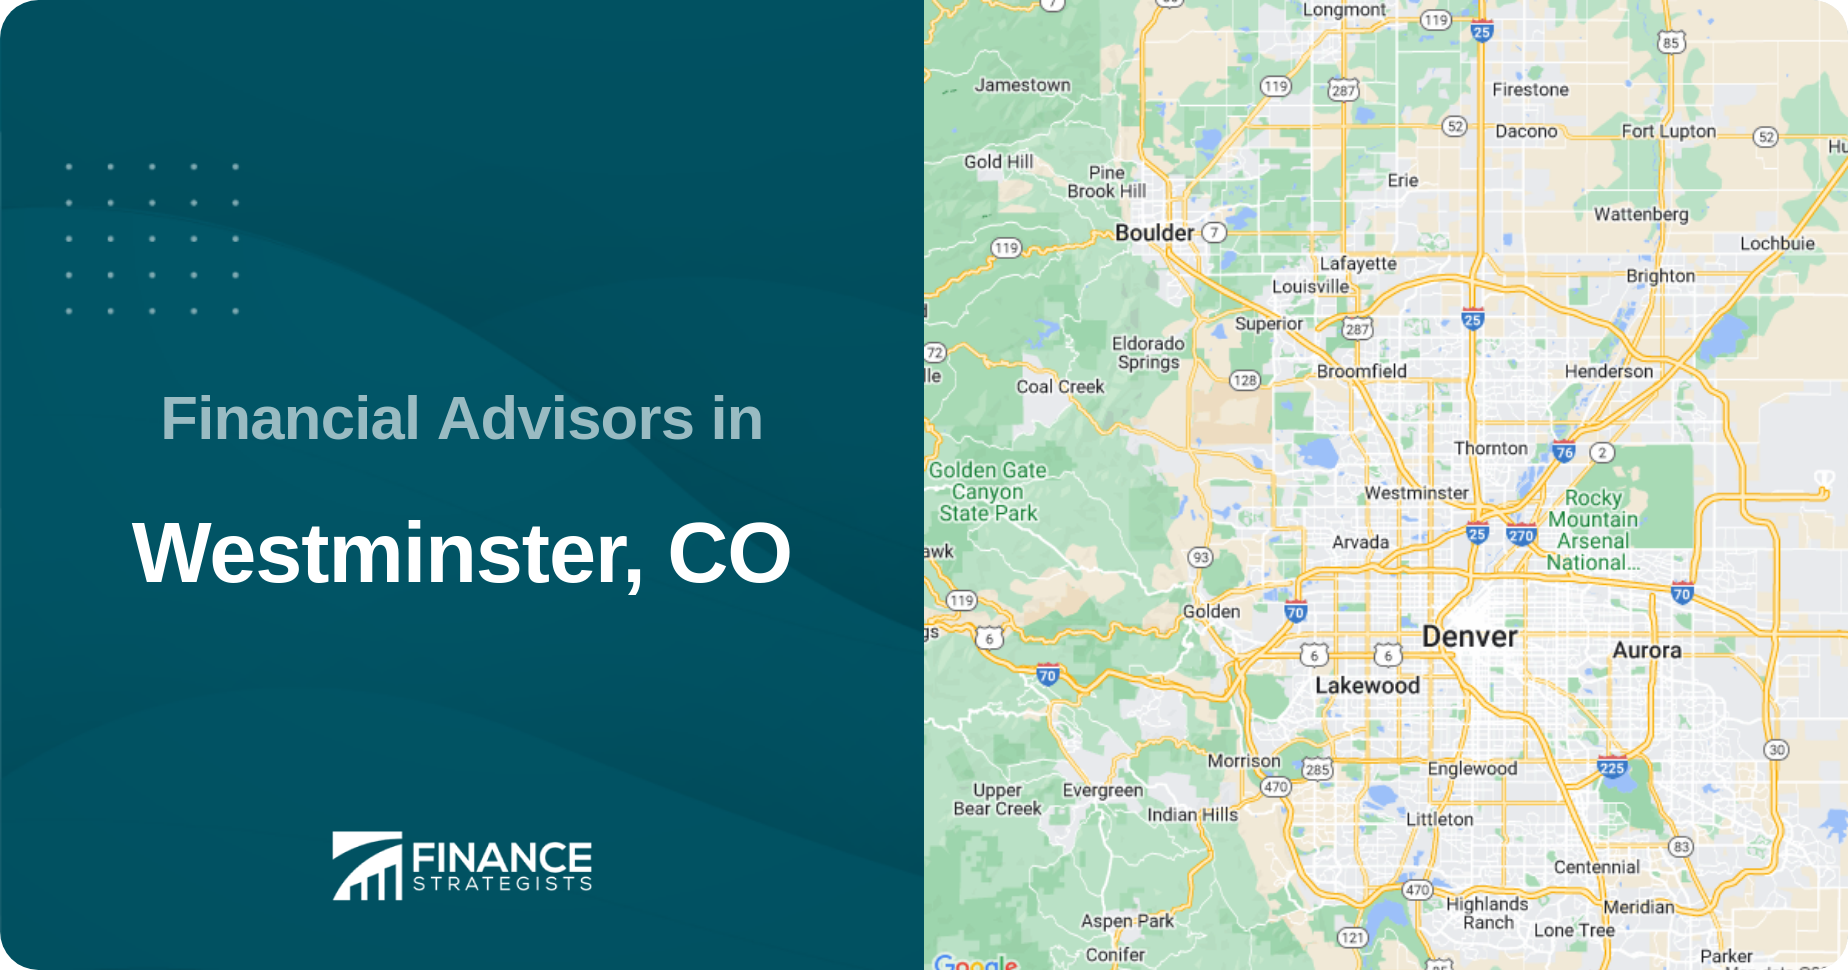 Financial Advisors in Westminster, CO